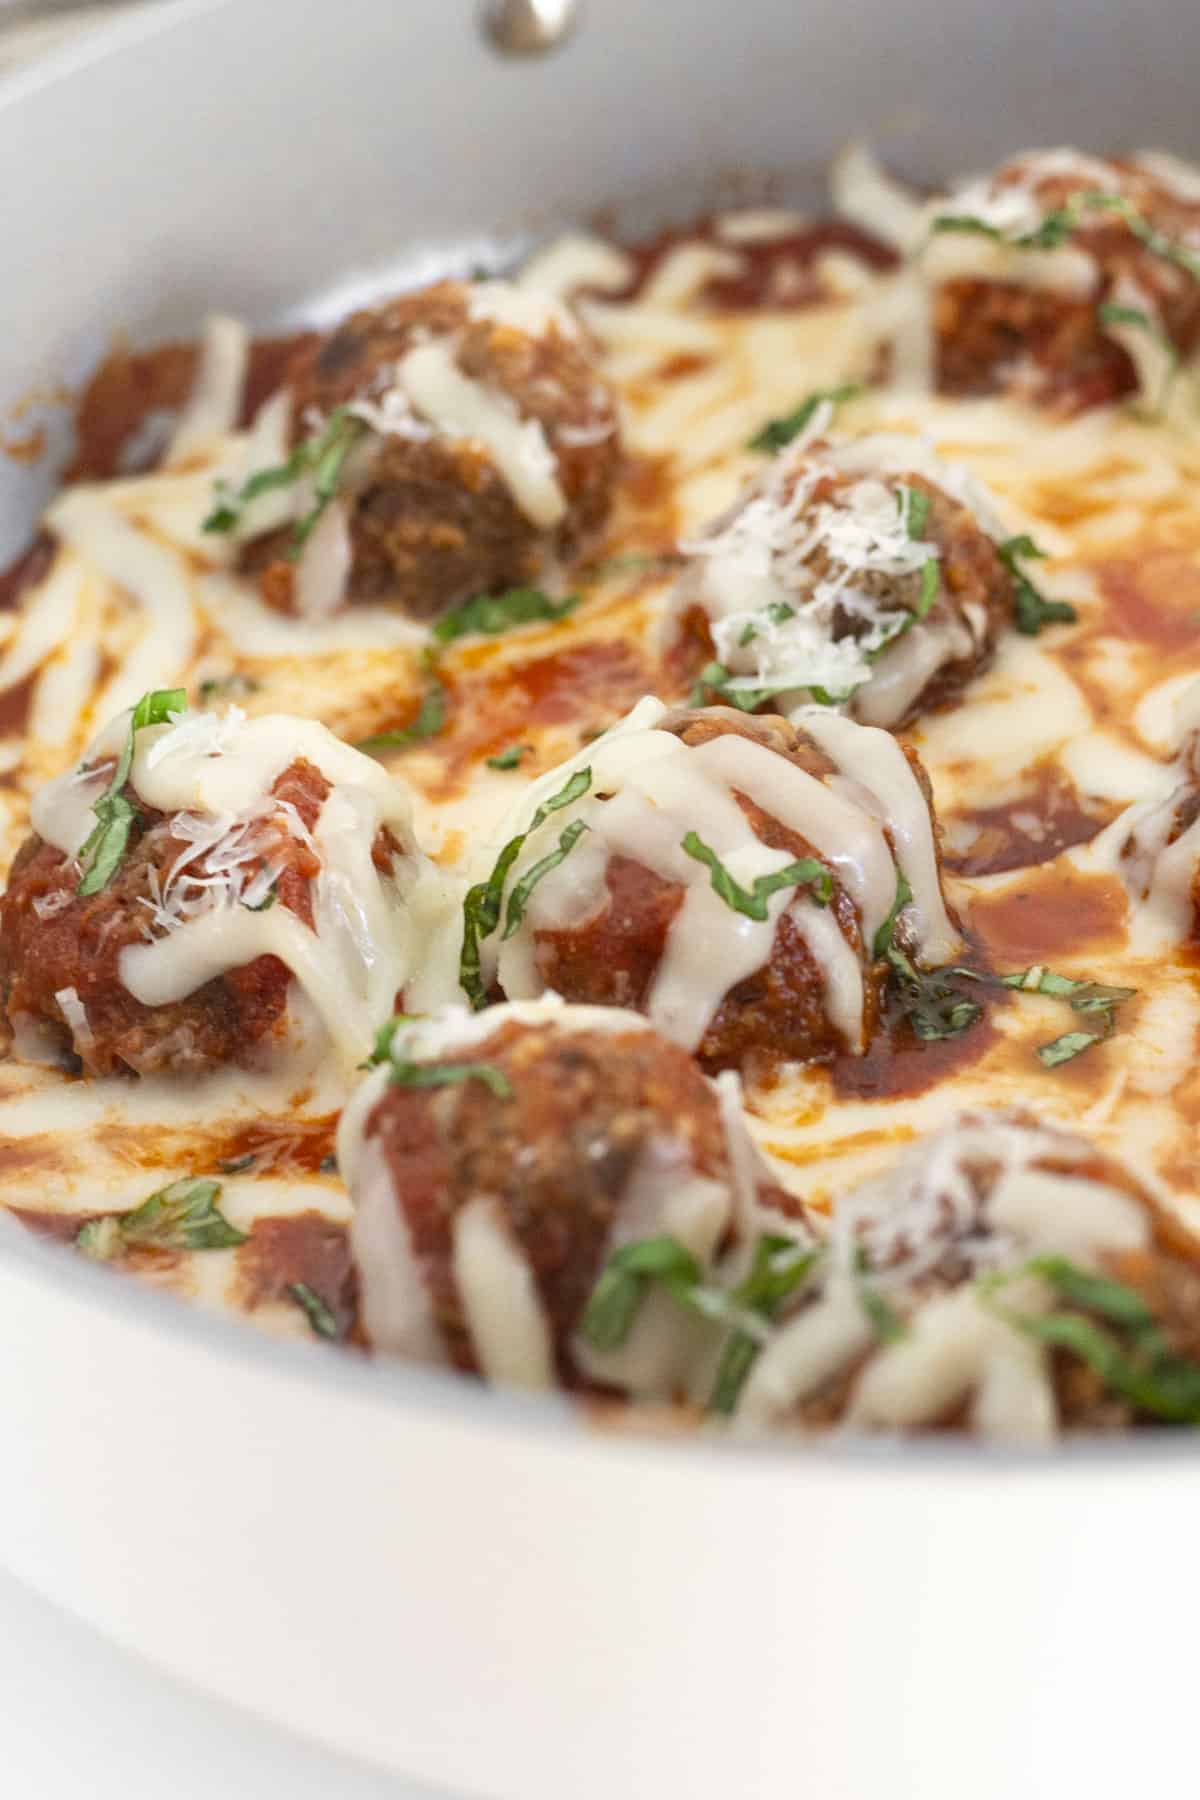 Finished meatball skillet with parmesan and basil.